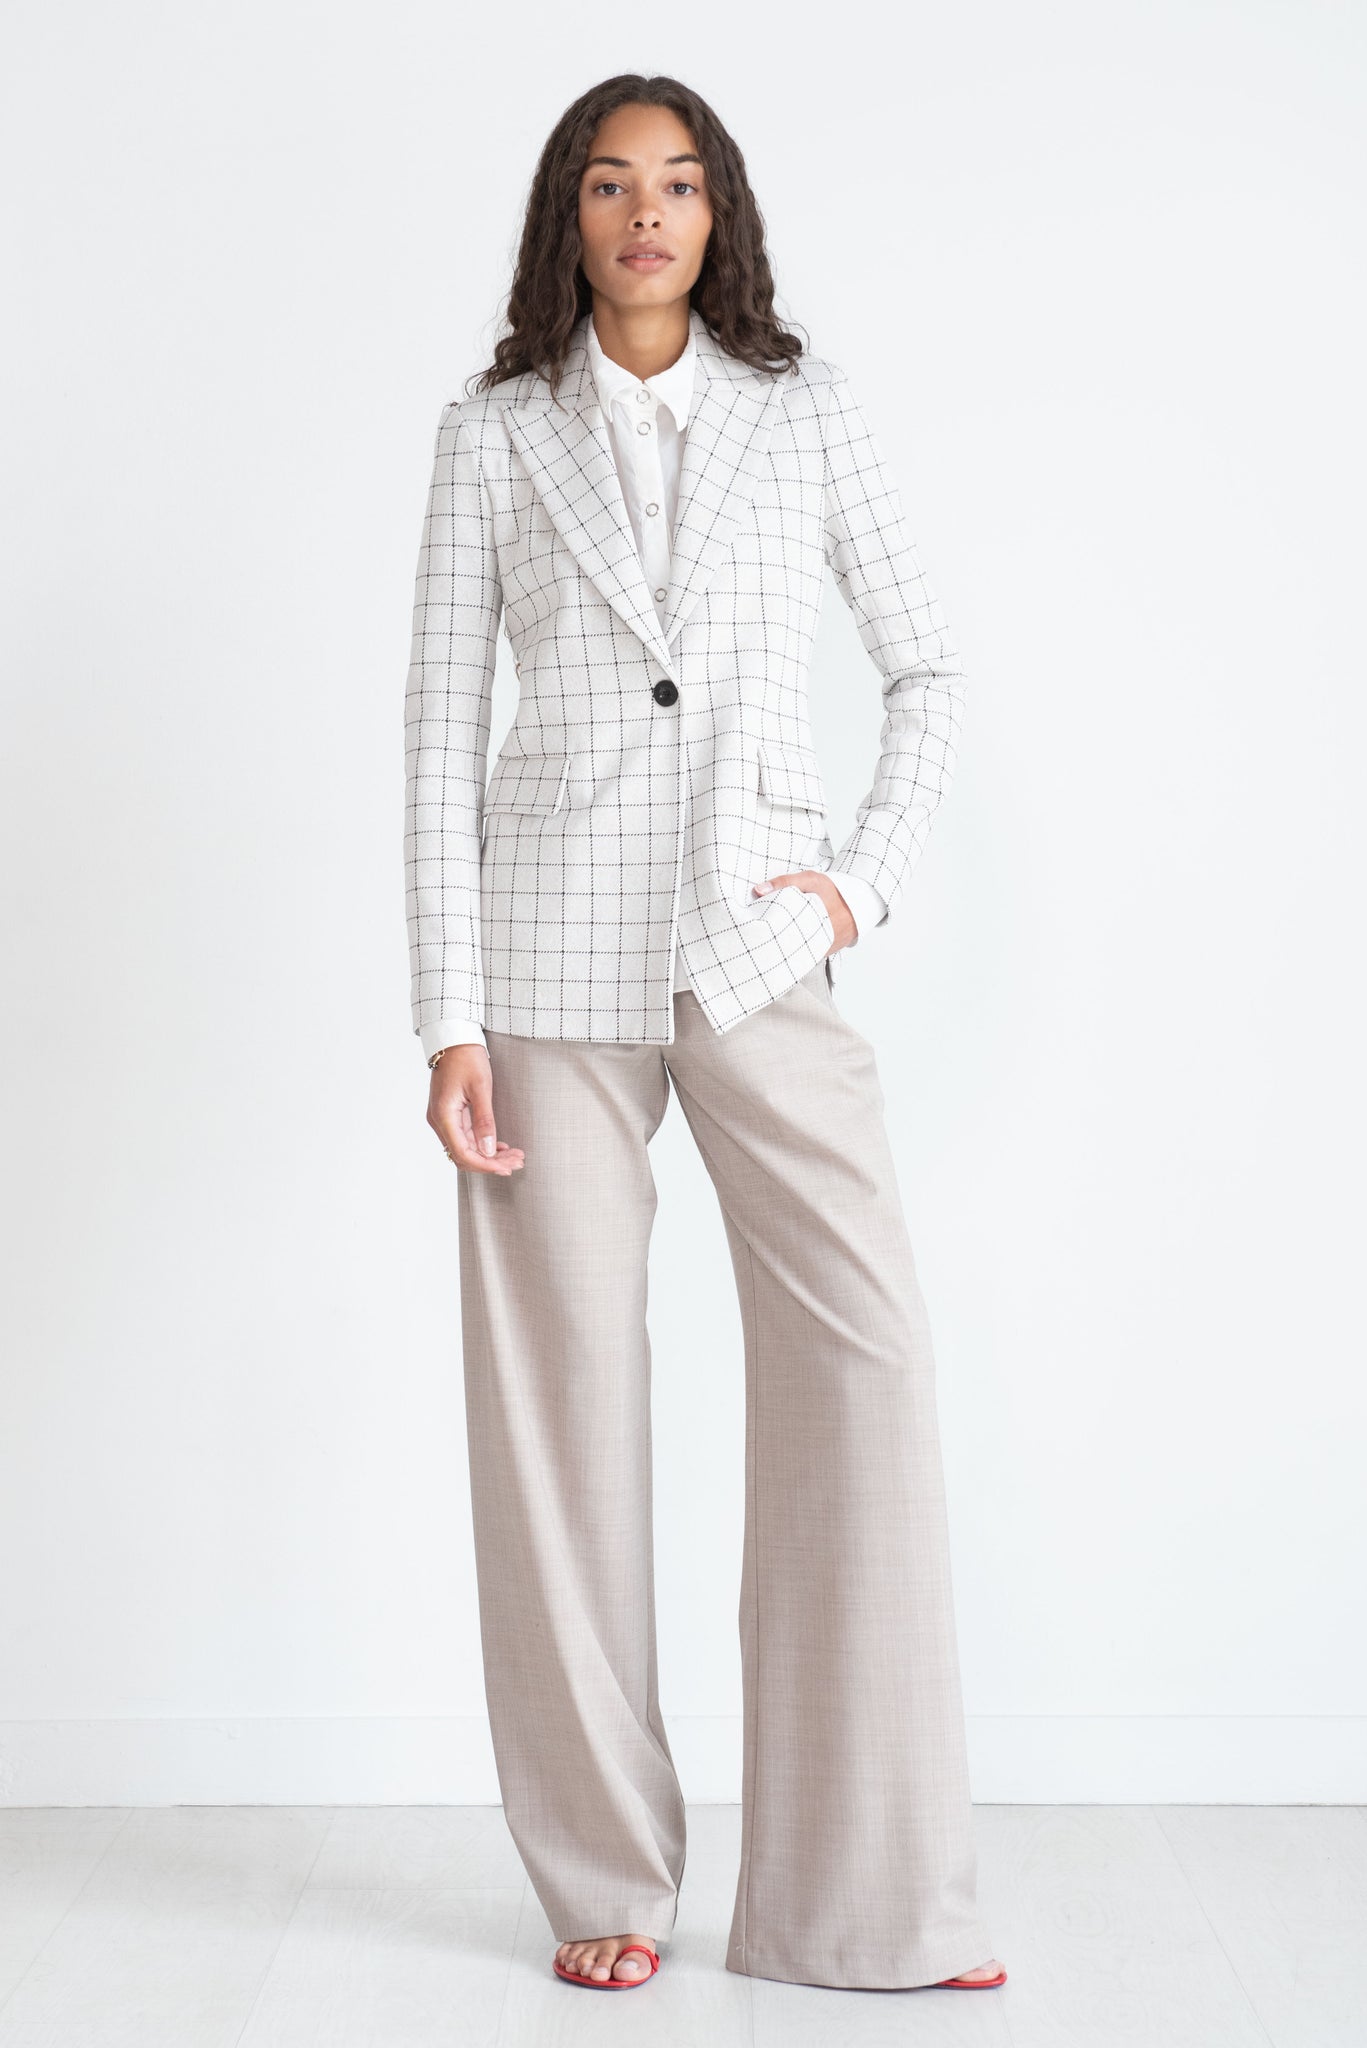 ROSETTA GETTY - Relaxed Pull On Pant, Turtledove